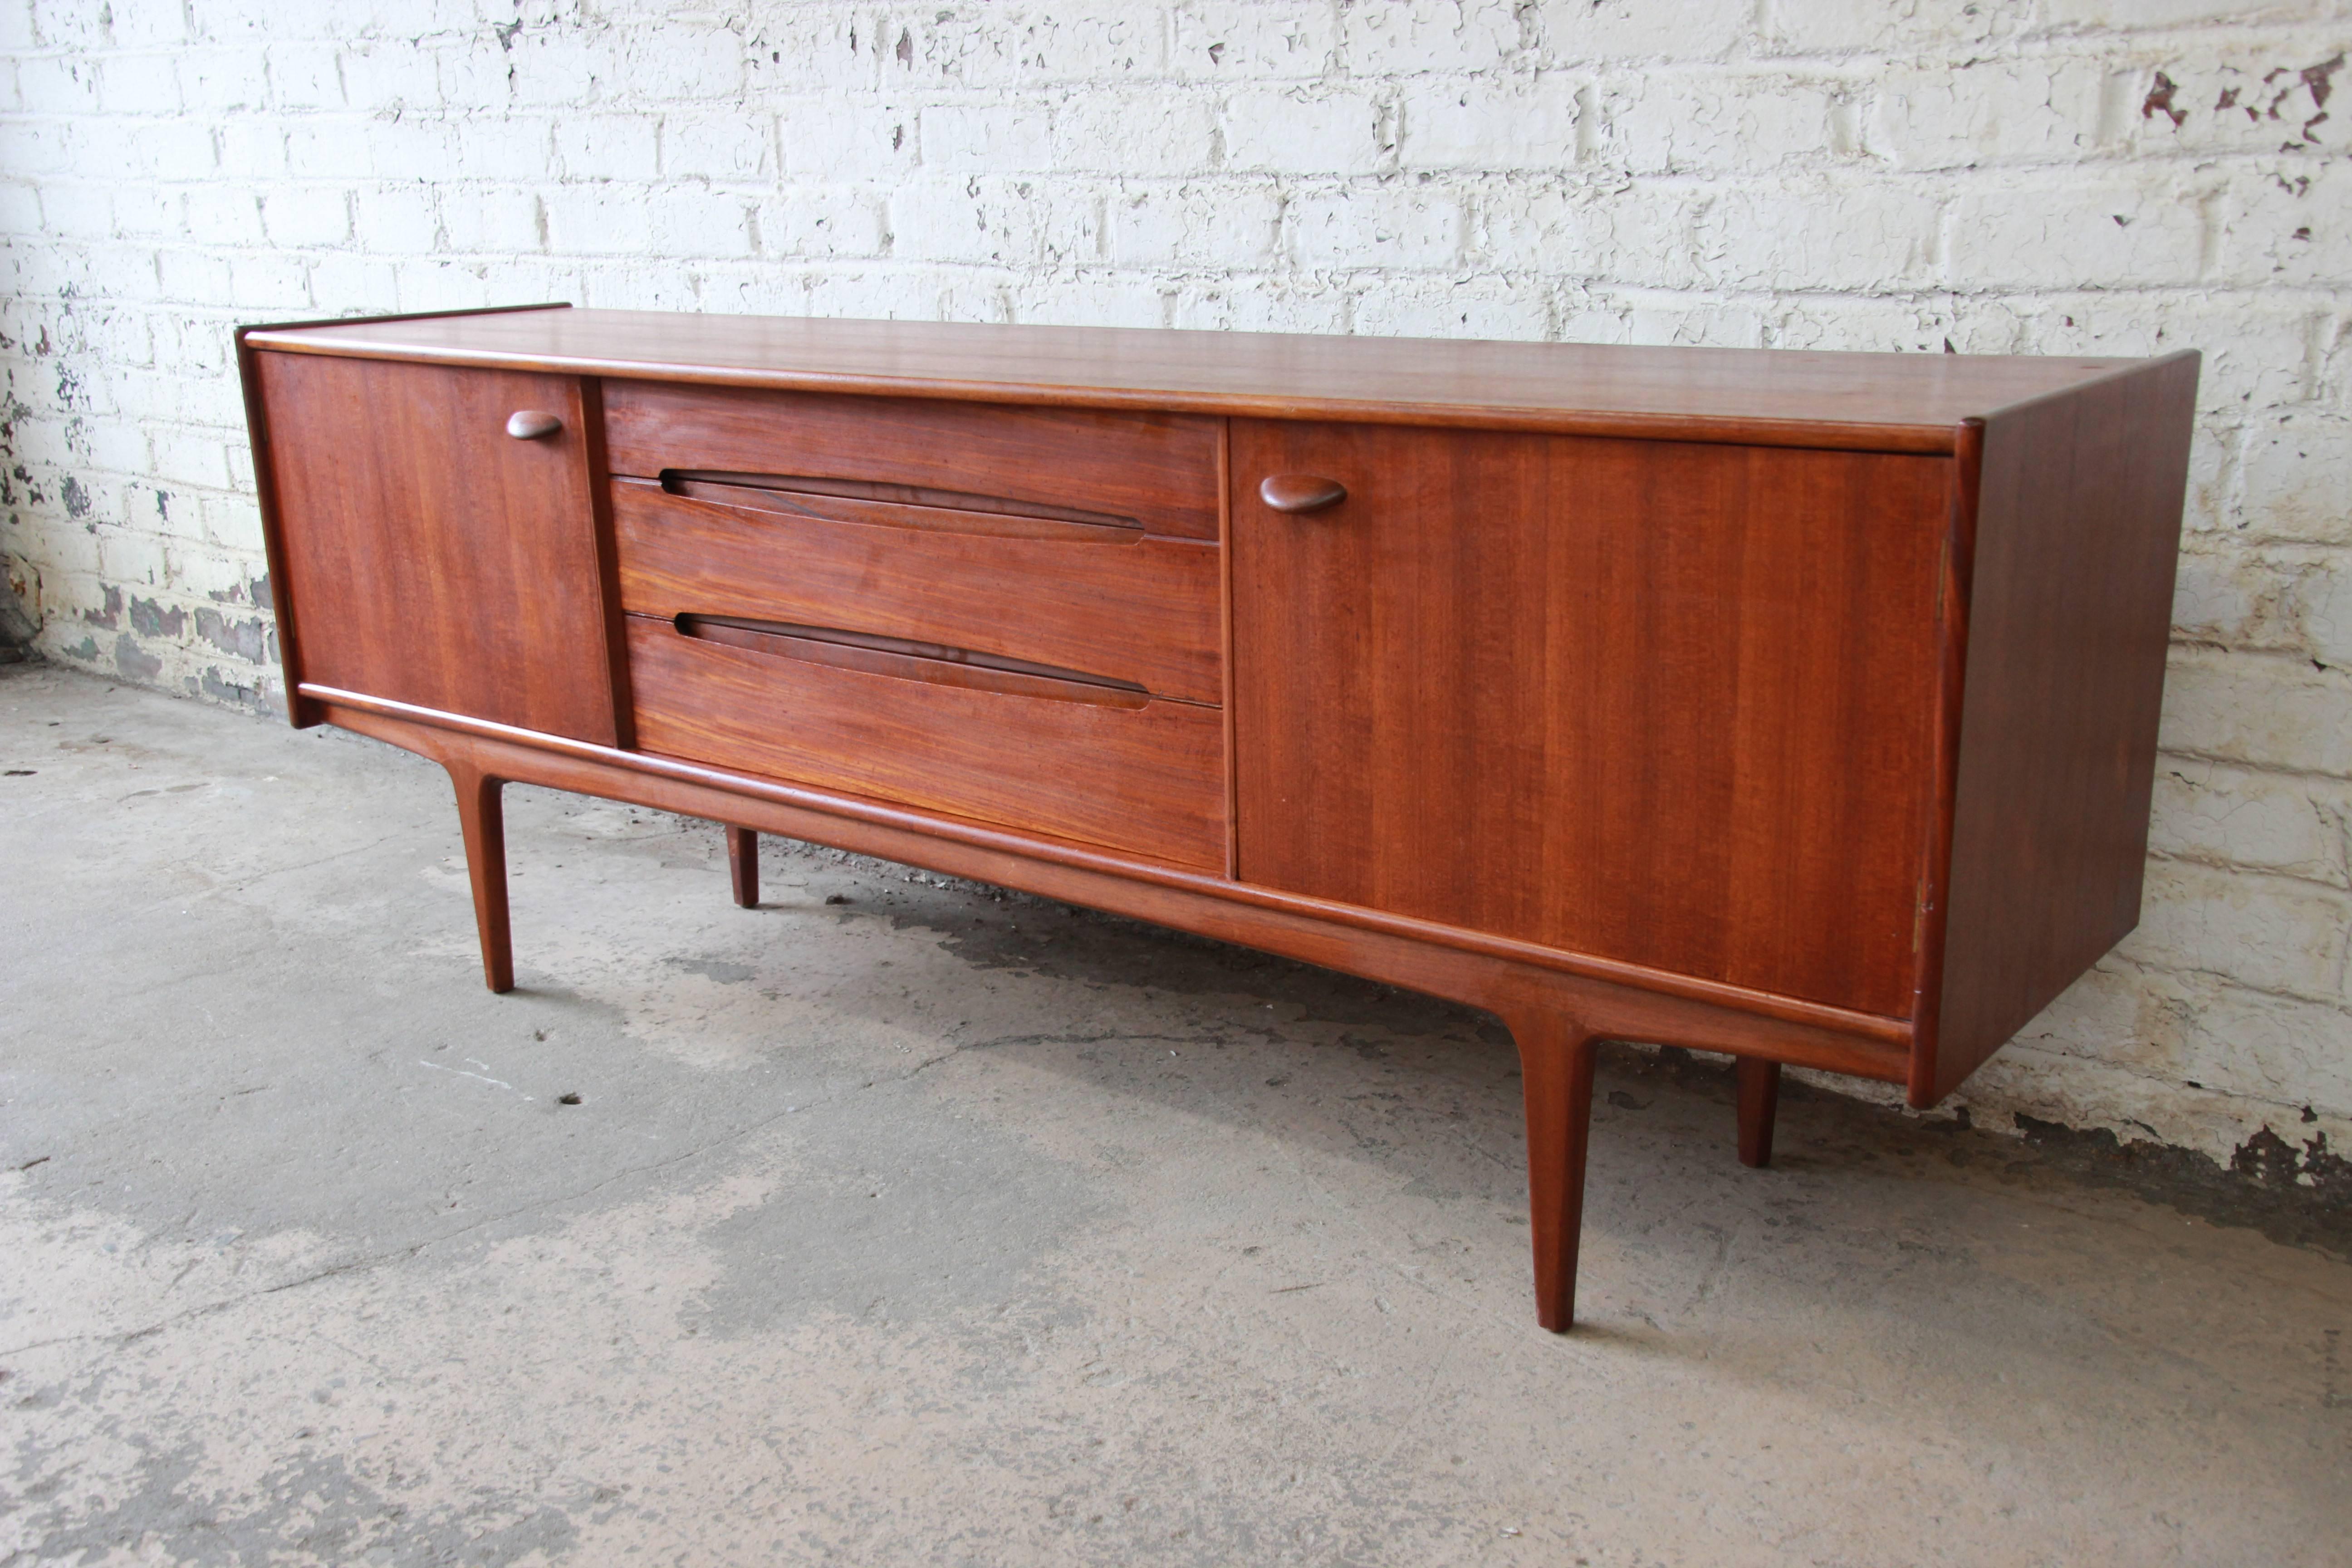 A stunning Danish modern style teak sideboard credenza by Younger. The credenza features gorgeous teak wood grain and sleek midcentury design, with a uniquely designed slightly curved front edge. It offers ample room for storage with three